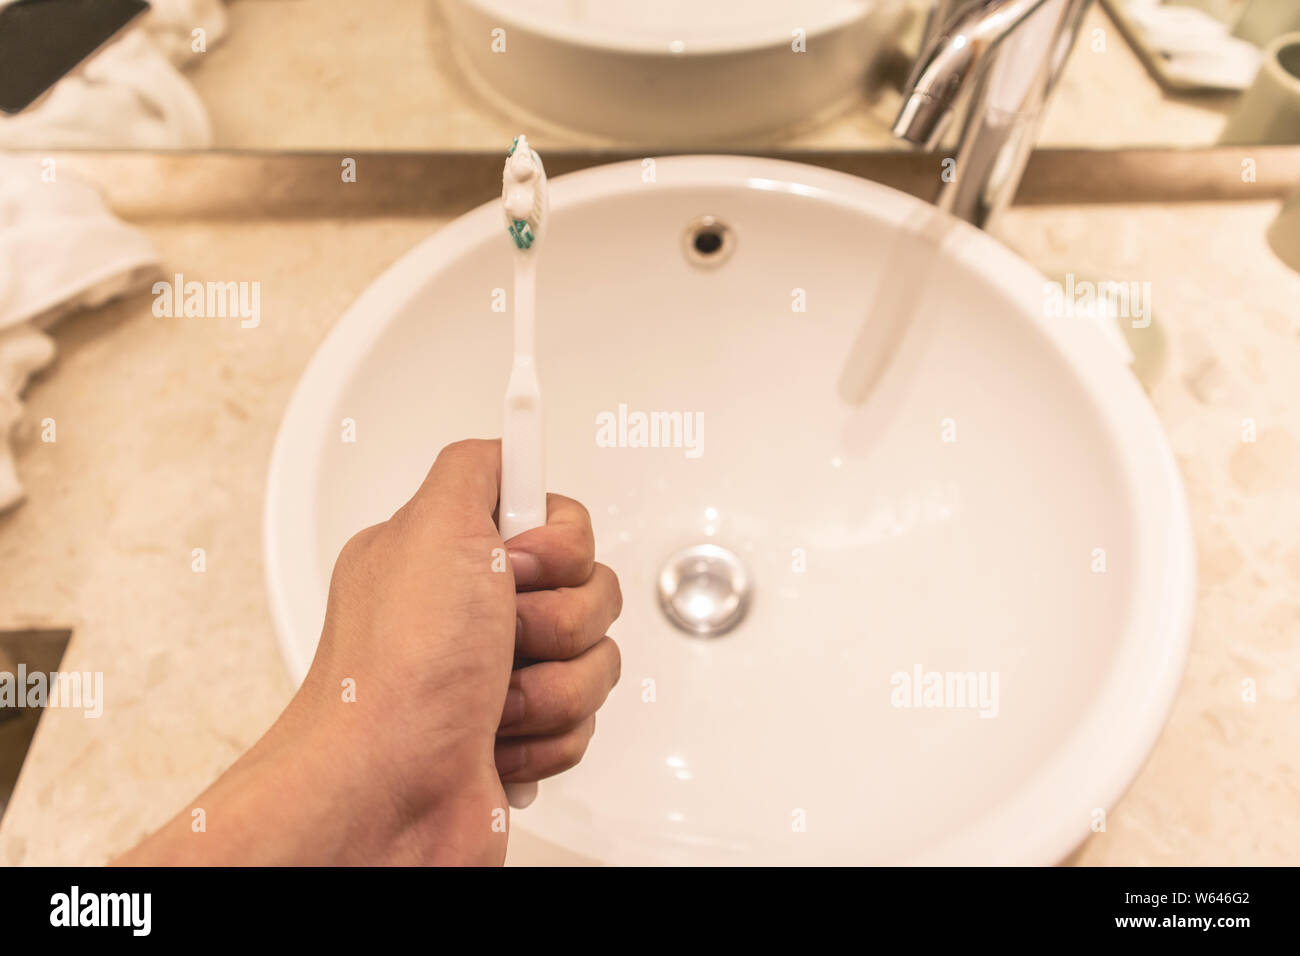 A man hand holding Toothbrush and toothpaste on the sink modern in bathroom. Stock Photo